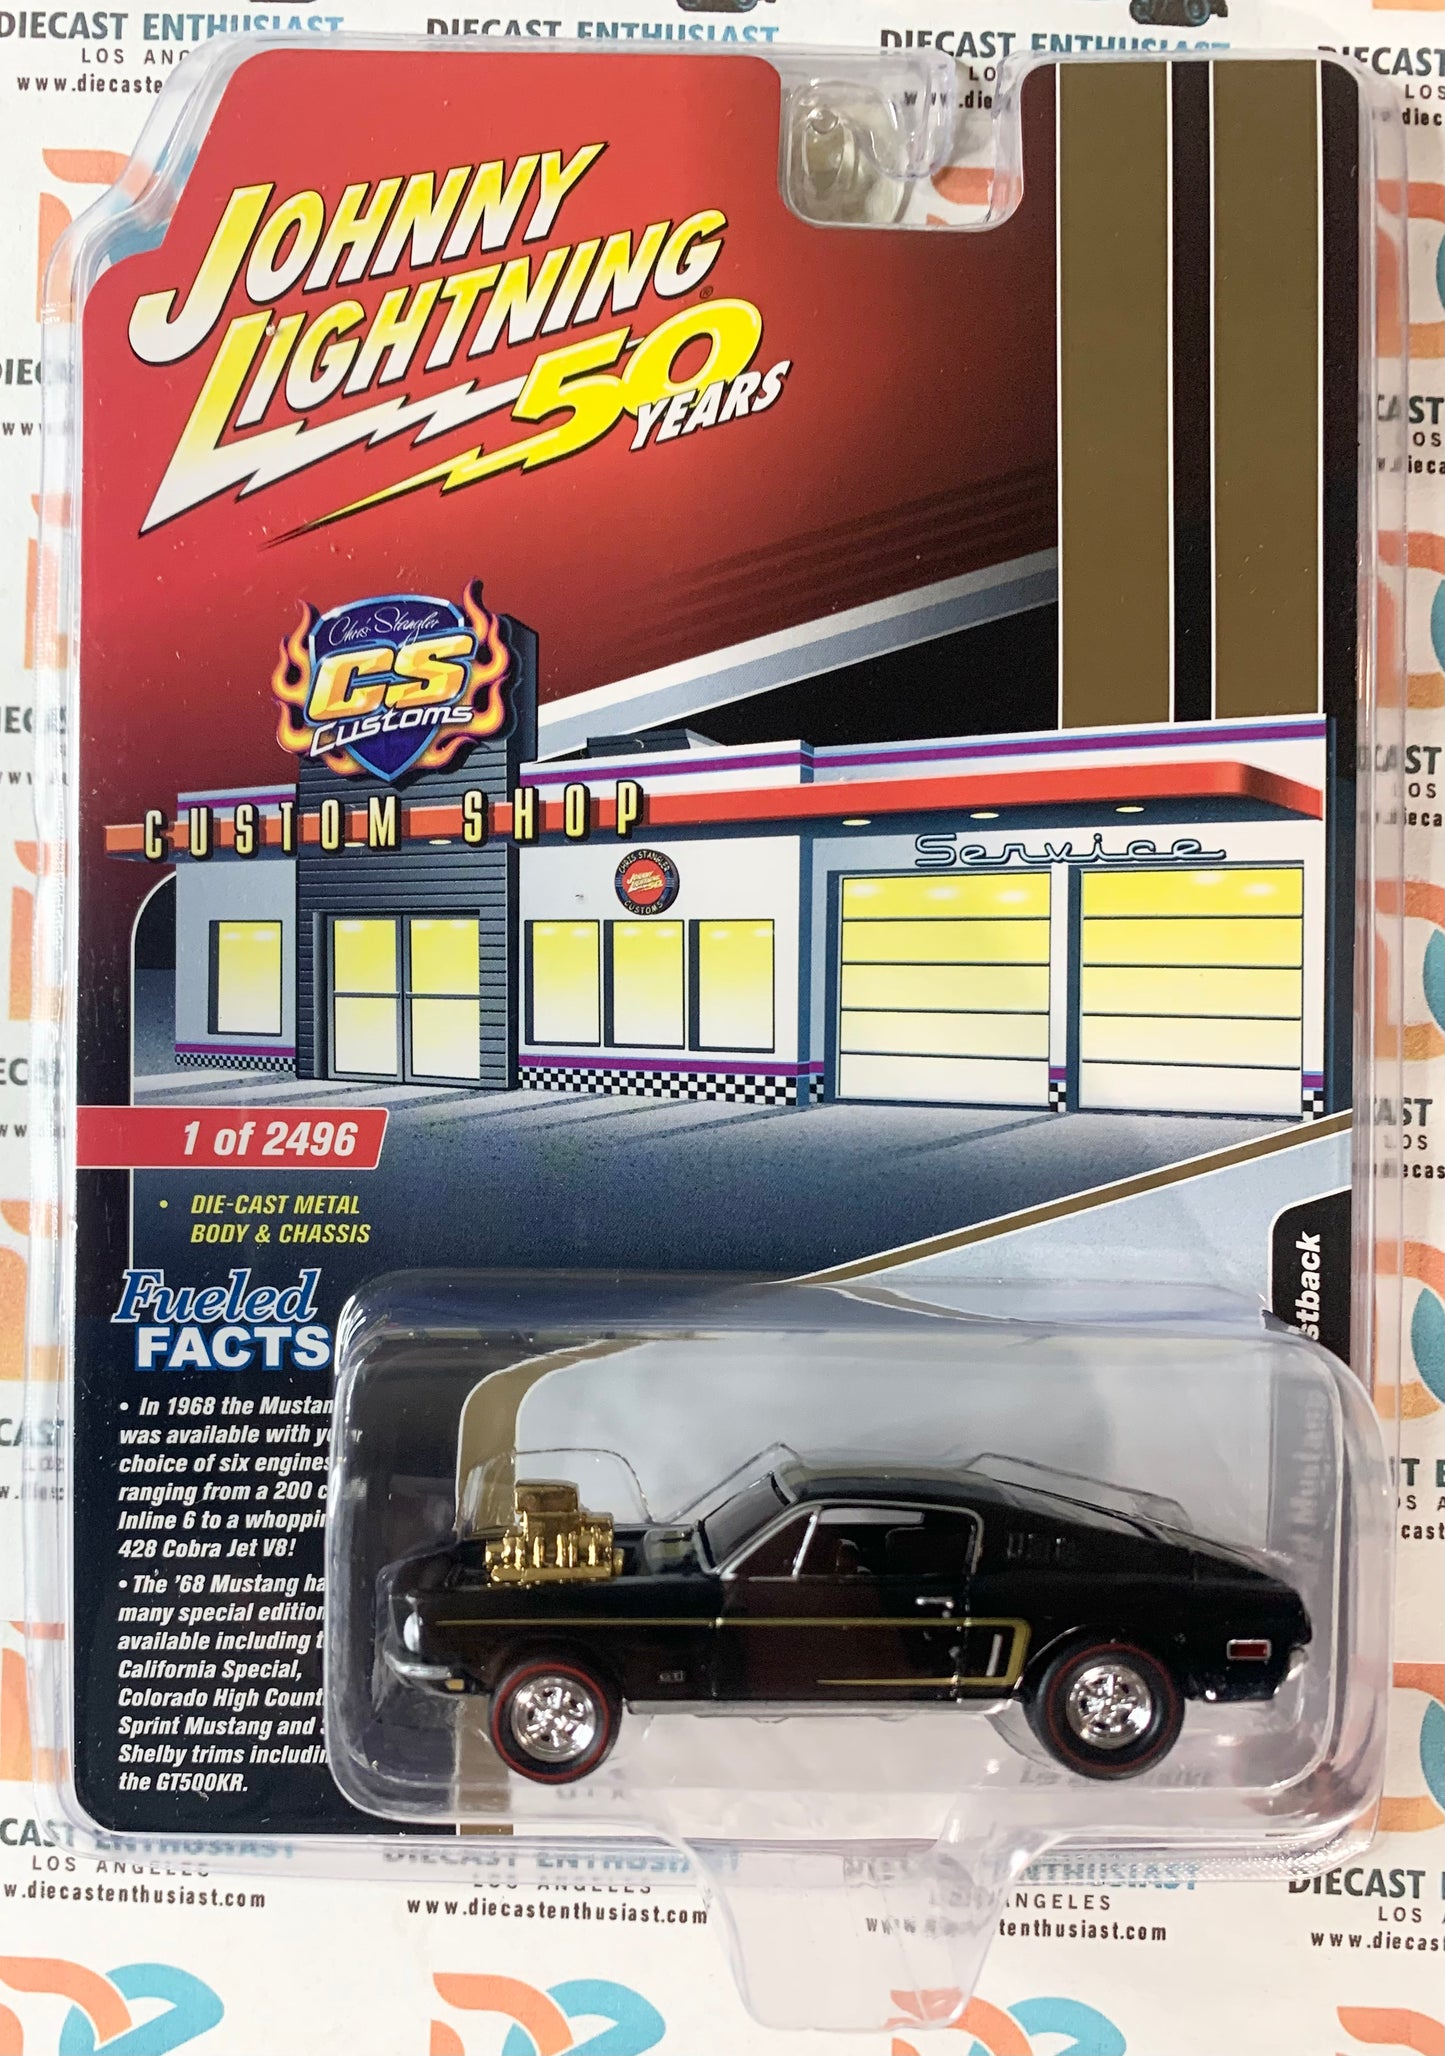 Johnny Lightning CS Customs Exclusives 1968 Ford Mustang Fastback Blow Engine Black 1:64